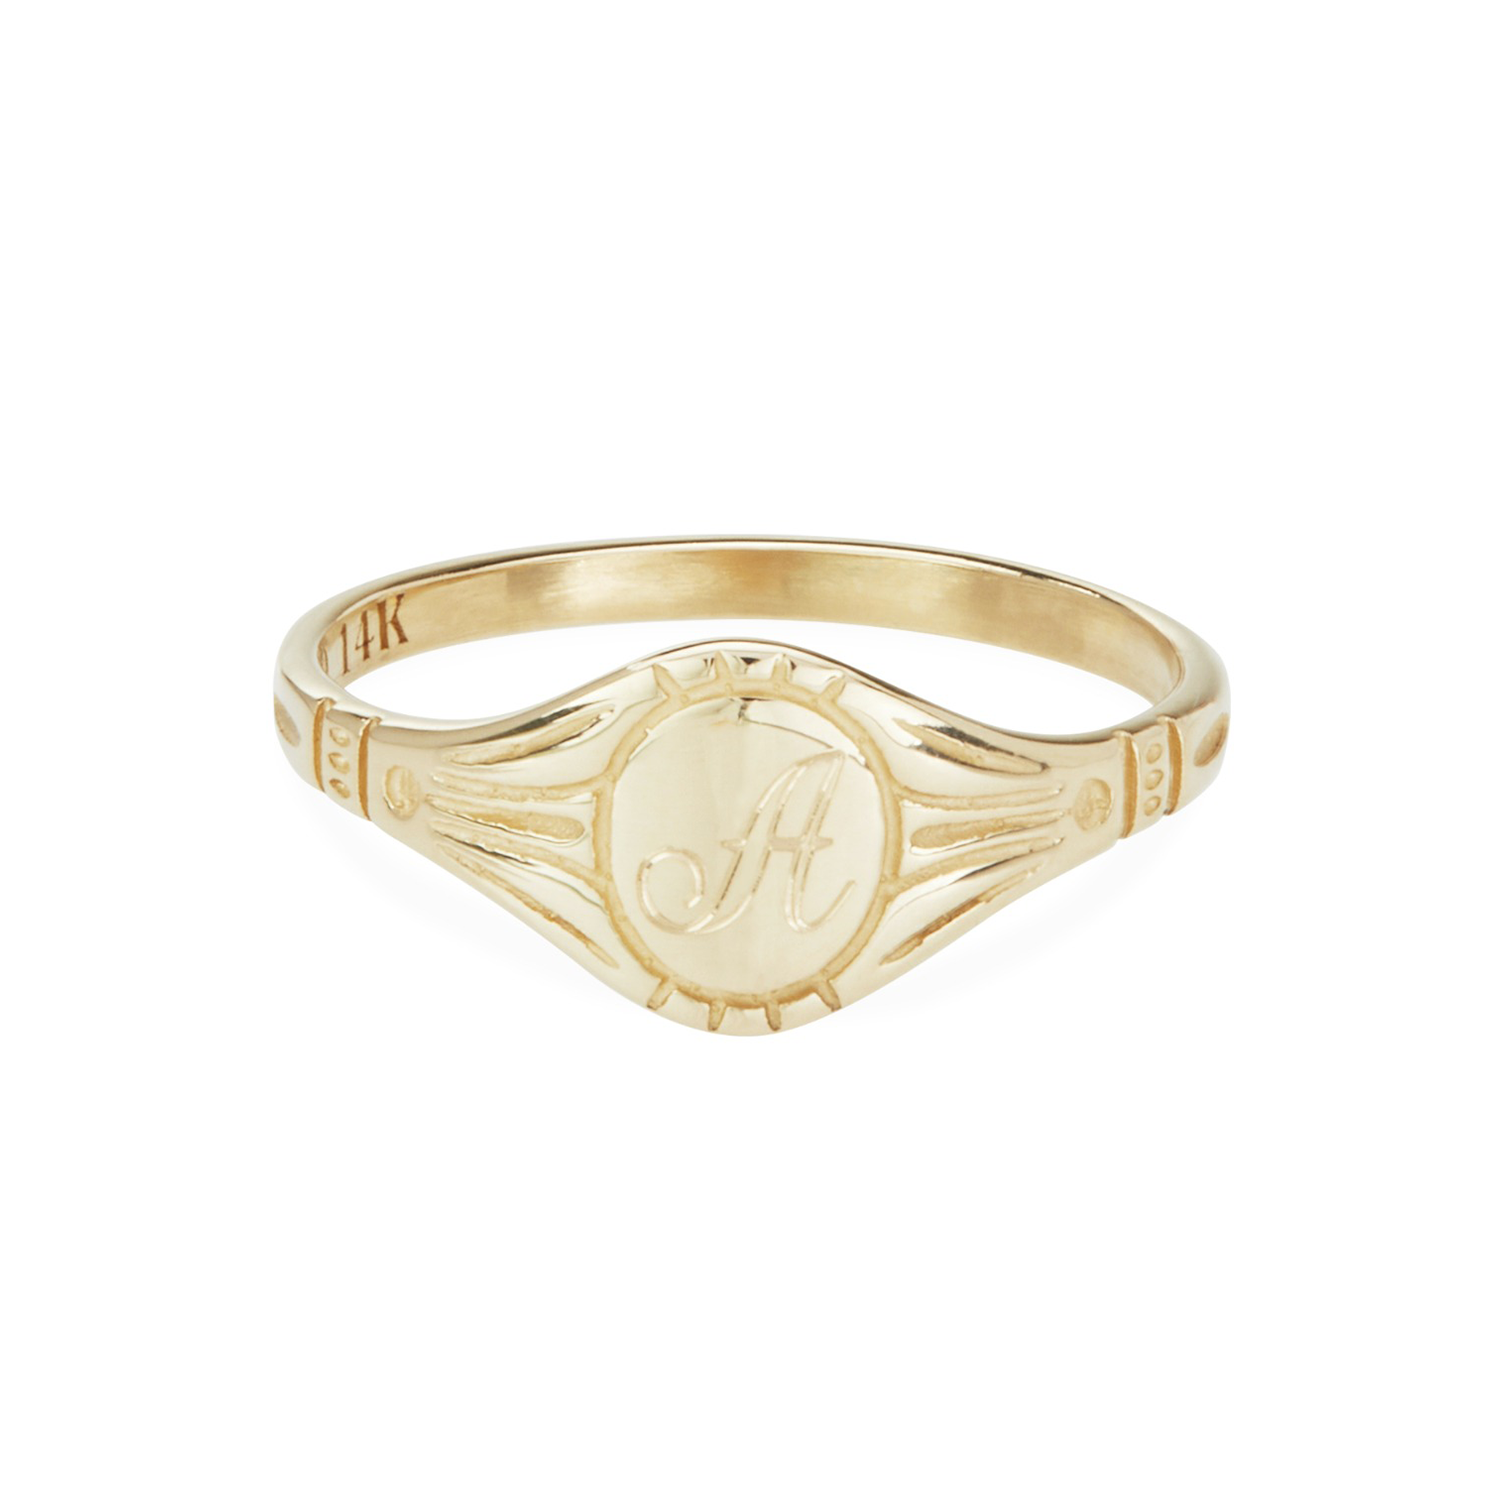 Gold ring with engraved A initial by Catbird